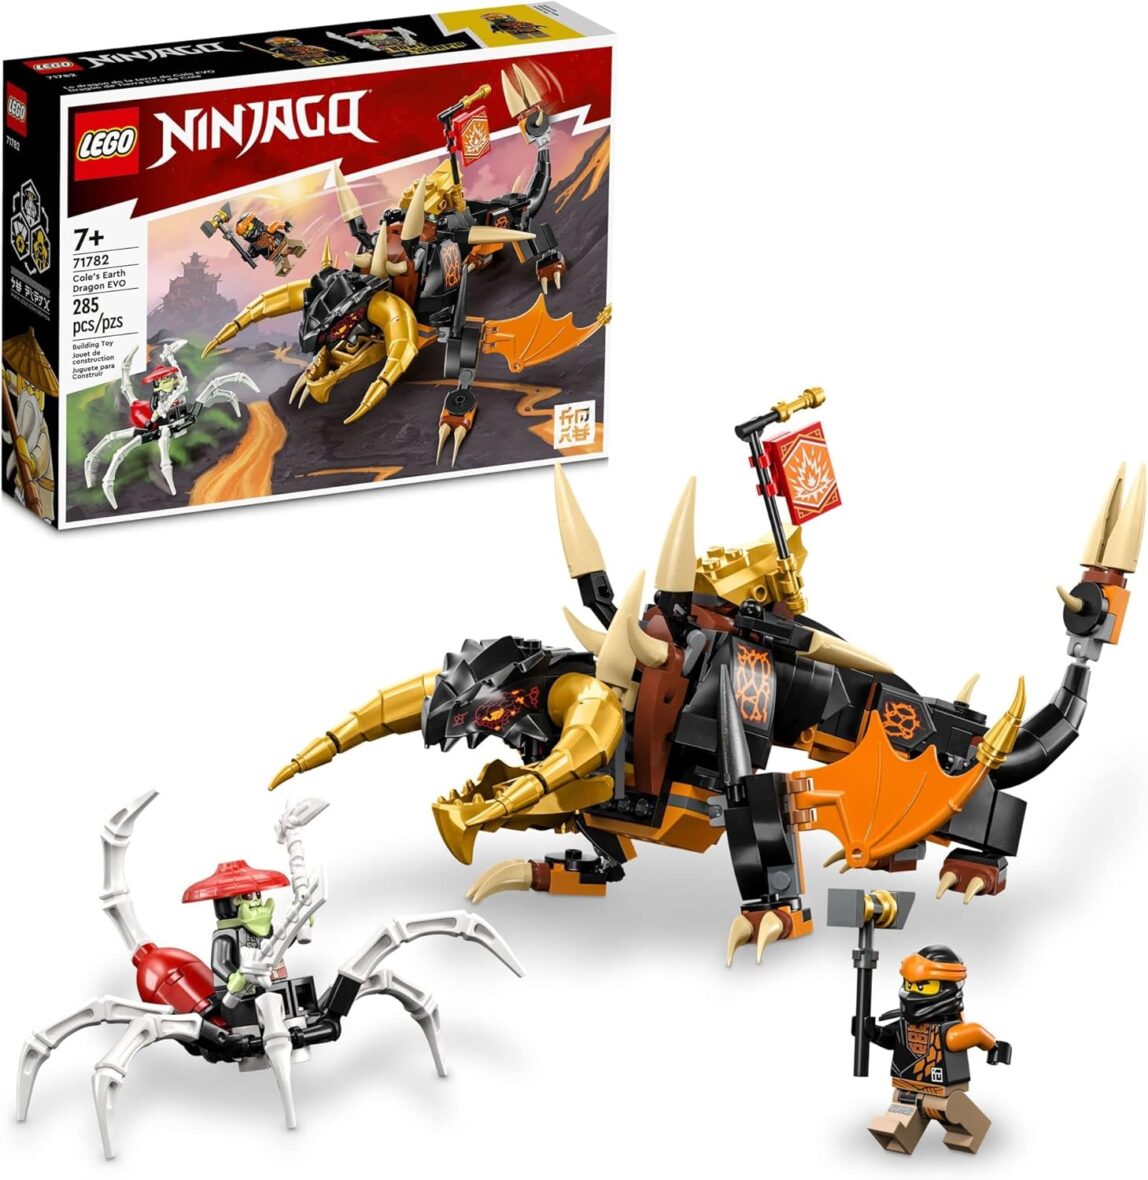 LEGO NINJAGO Cole’s Earth Dragon EVO 71782, Upgradable Action Toy Figure for Boys and Girls with Battle Scorpion Creature and 2 Minifigures